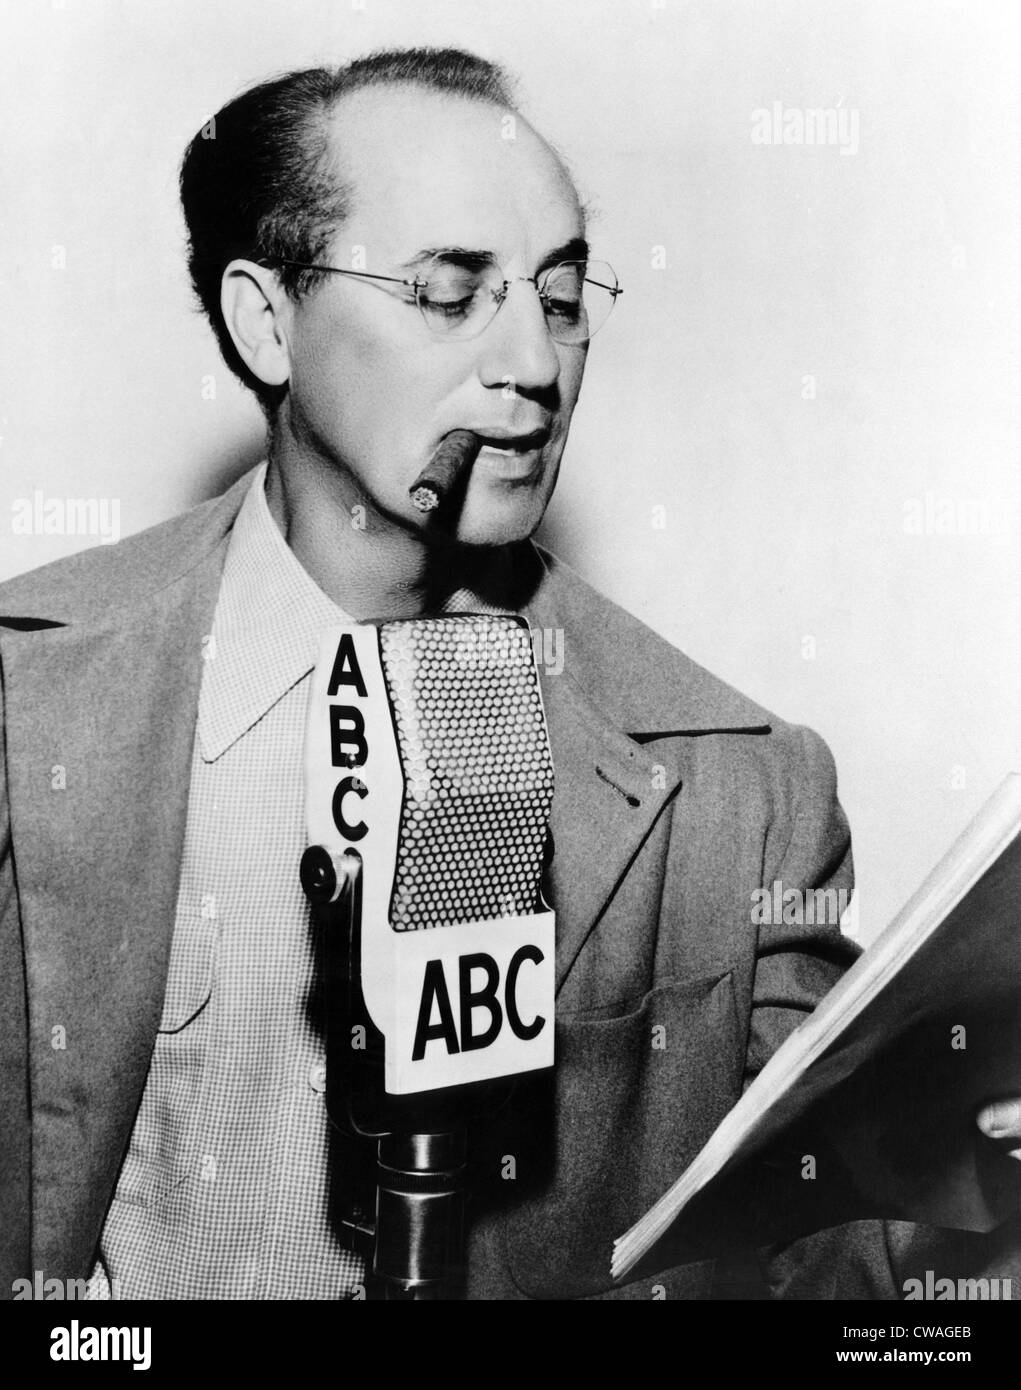 American comedian Groucho Marx, (1890-1977), c. 1947.. Courtesy: CSU Archives / Everett Collection Stock Photo